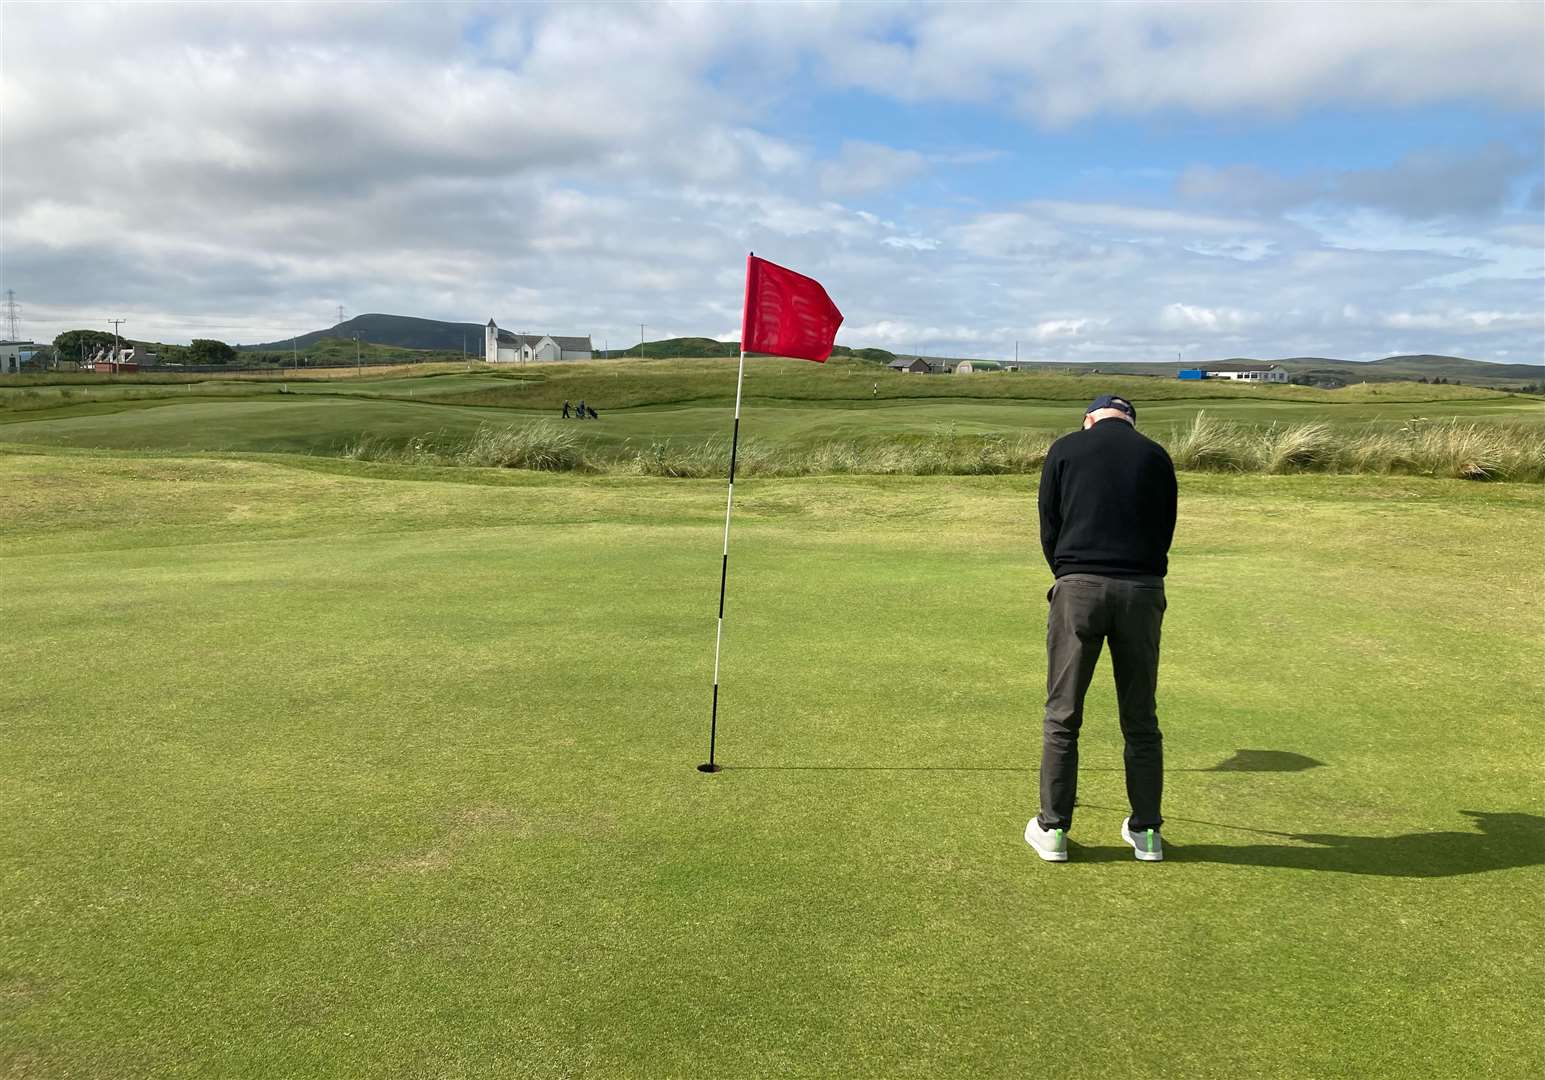 Fred Groves putting on the 13th hole during the President's Salver competition at Reay on Saturday.